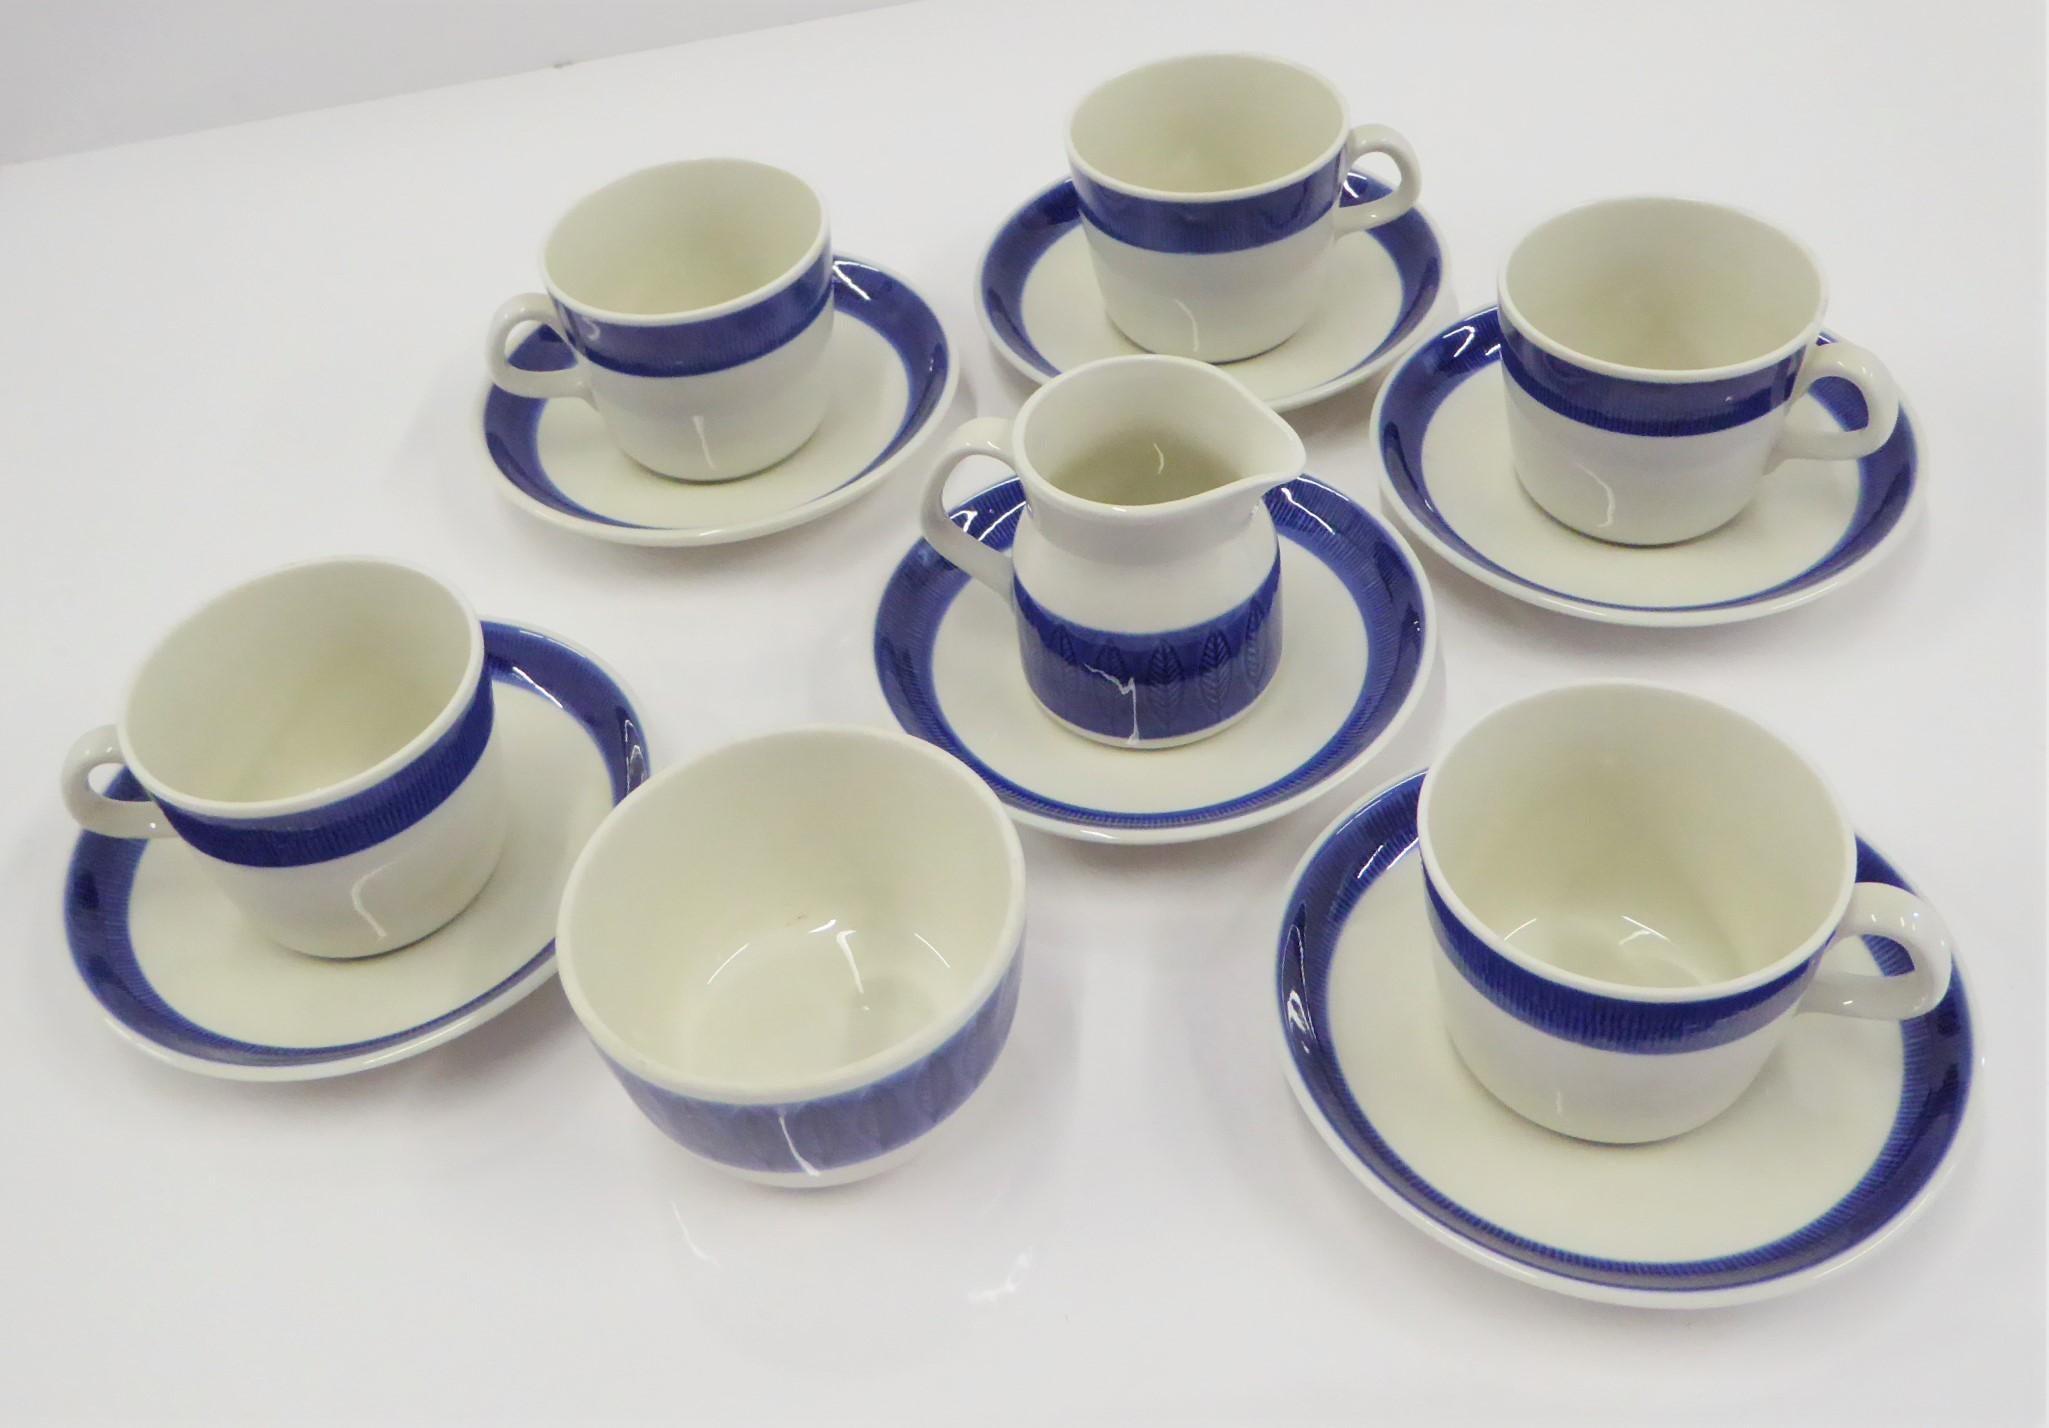 A Rörstrand coffee / tea set of cups, saucers, creamer and sugar bowl in the  KOKA BLÅ  pattern designed by Hertha Bengtson, was first manufactured in 1956 and remained in production until 1988.  The translation of the name is Boil/ Scald Blue which